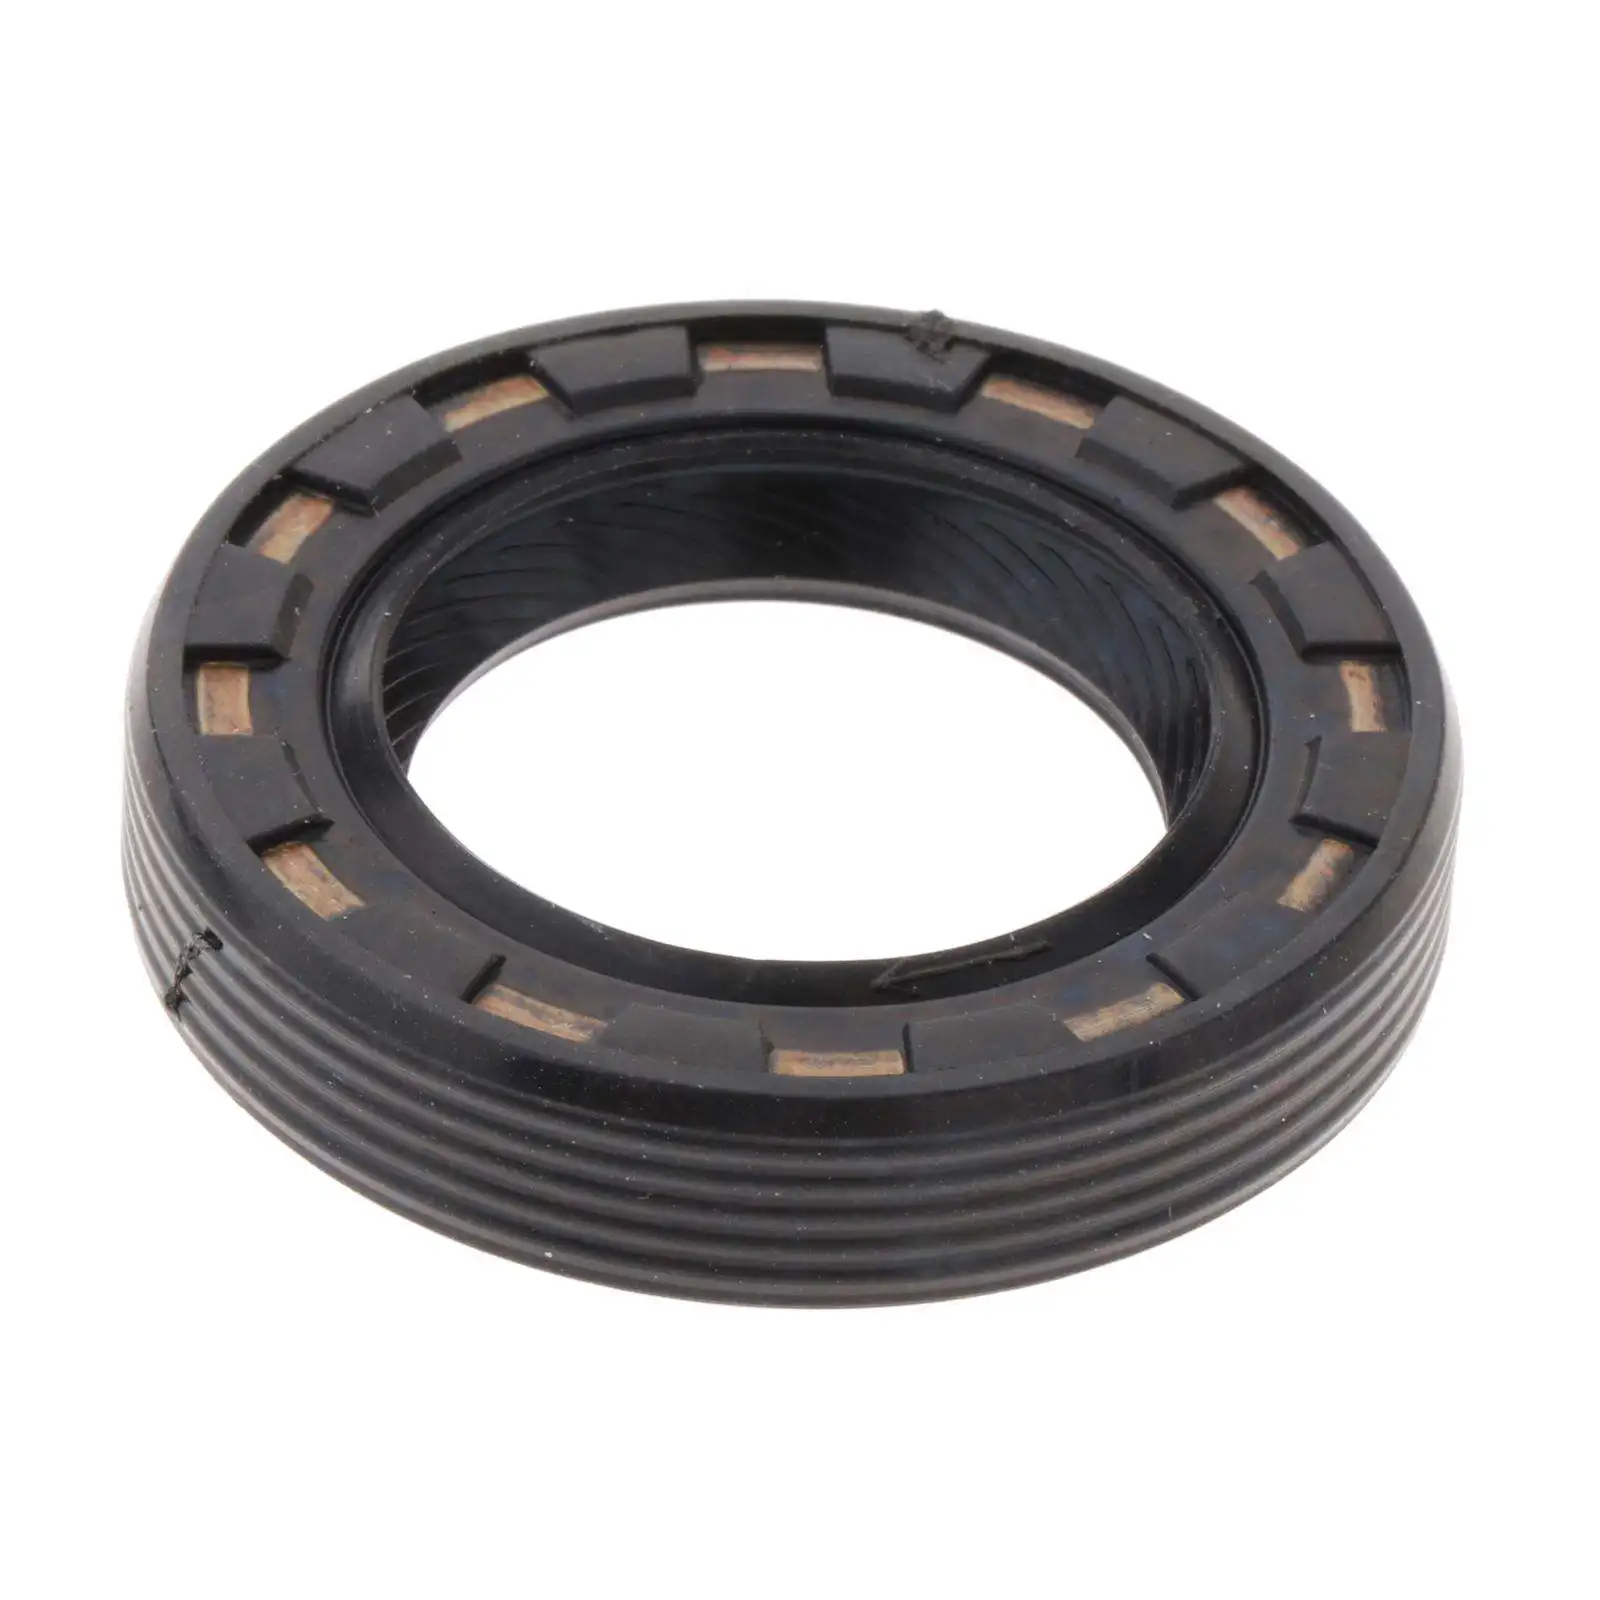 

Transmission Front Oil Seal Half Shaft Oil Seal Bearings Seals 01T/01J/01N Plug and Play Durable Replace A4 A6 A8 Fits for Audi